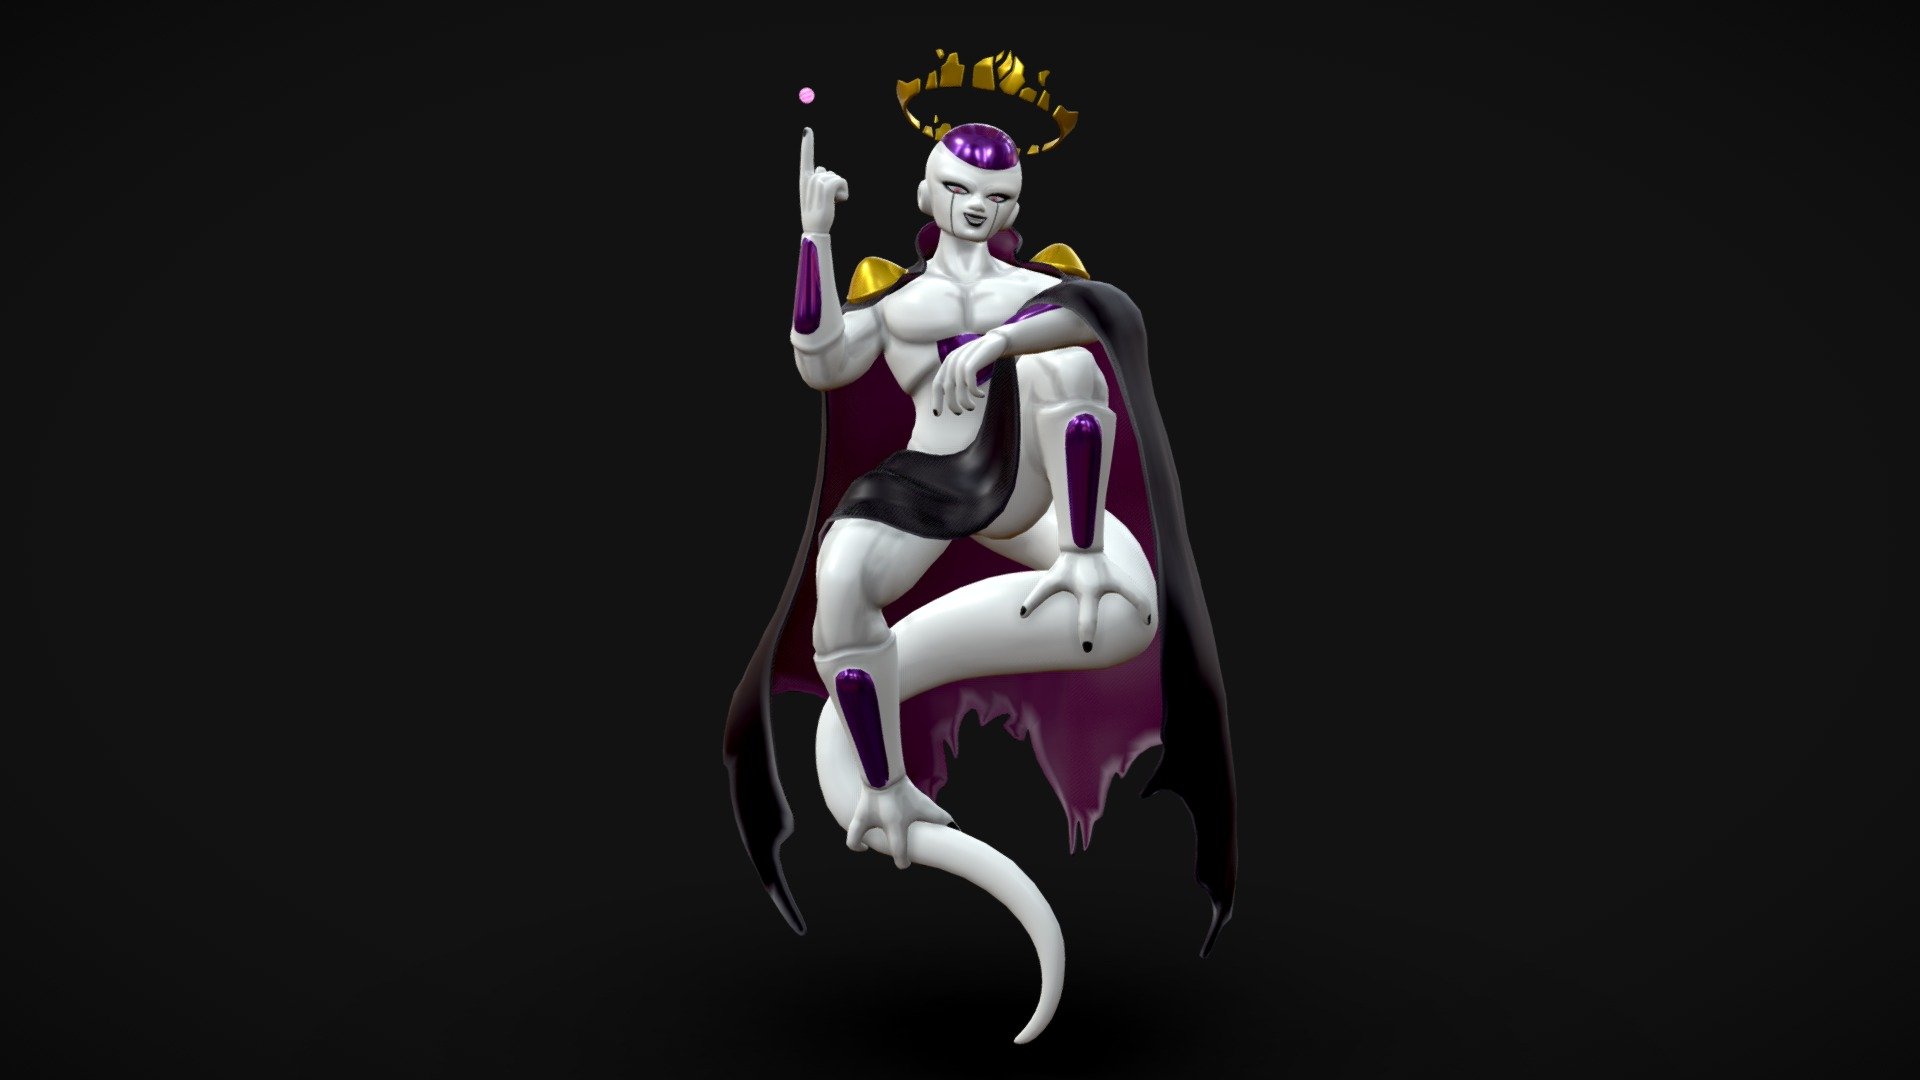 The Emperor Frieza.
Based on the concept of artist Geoffrey Daigon 3d model